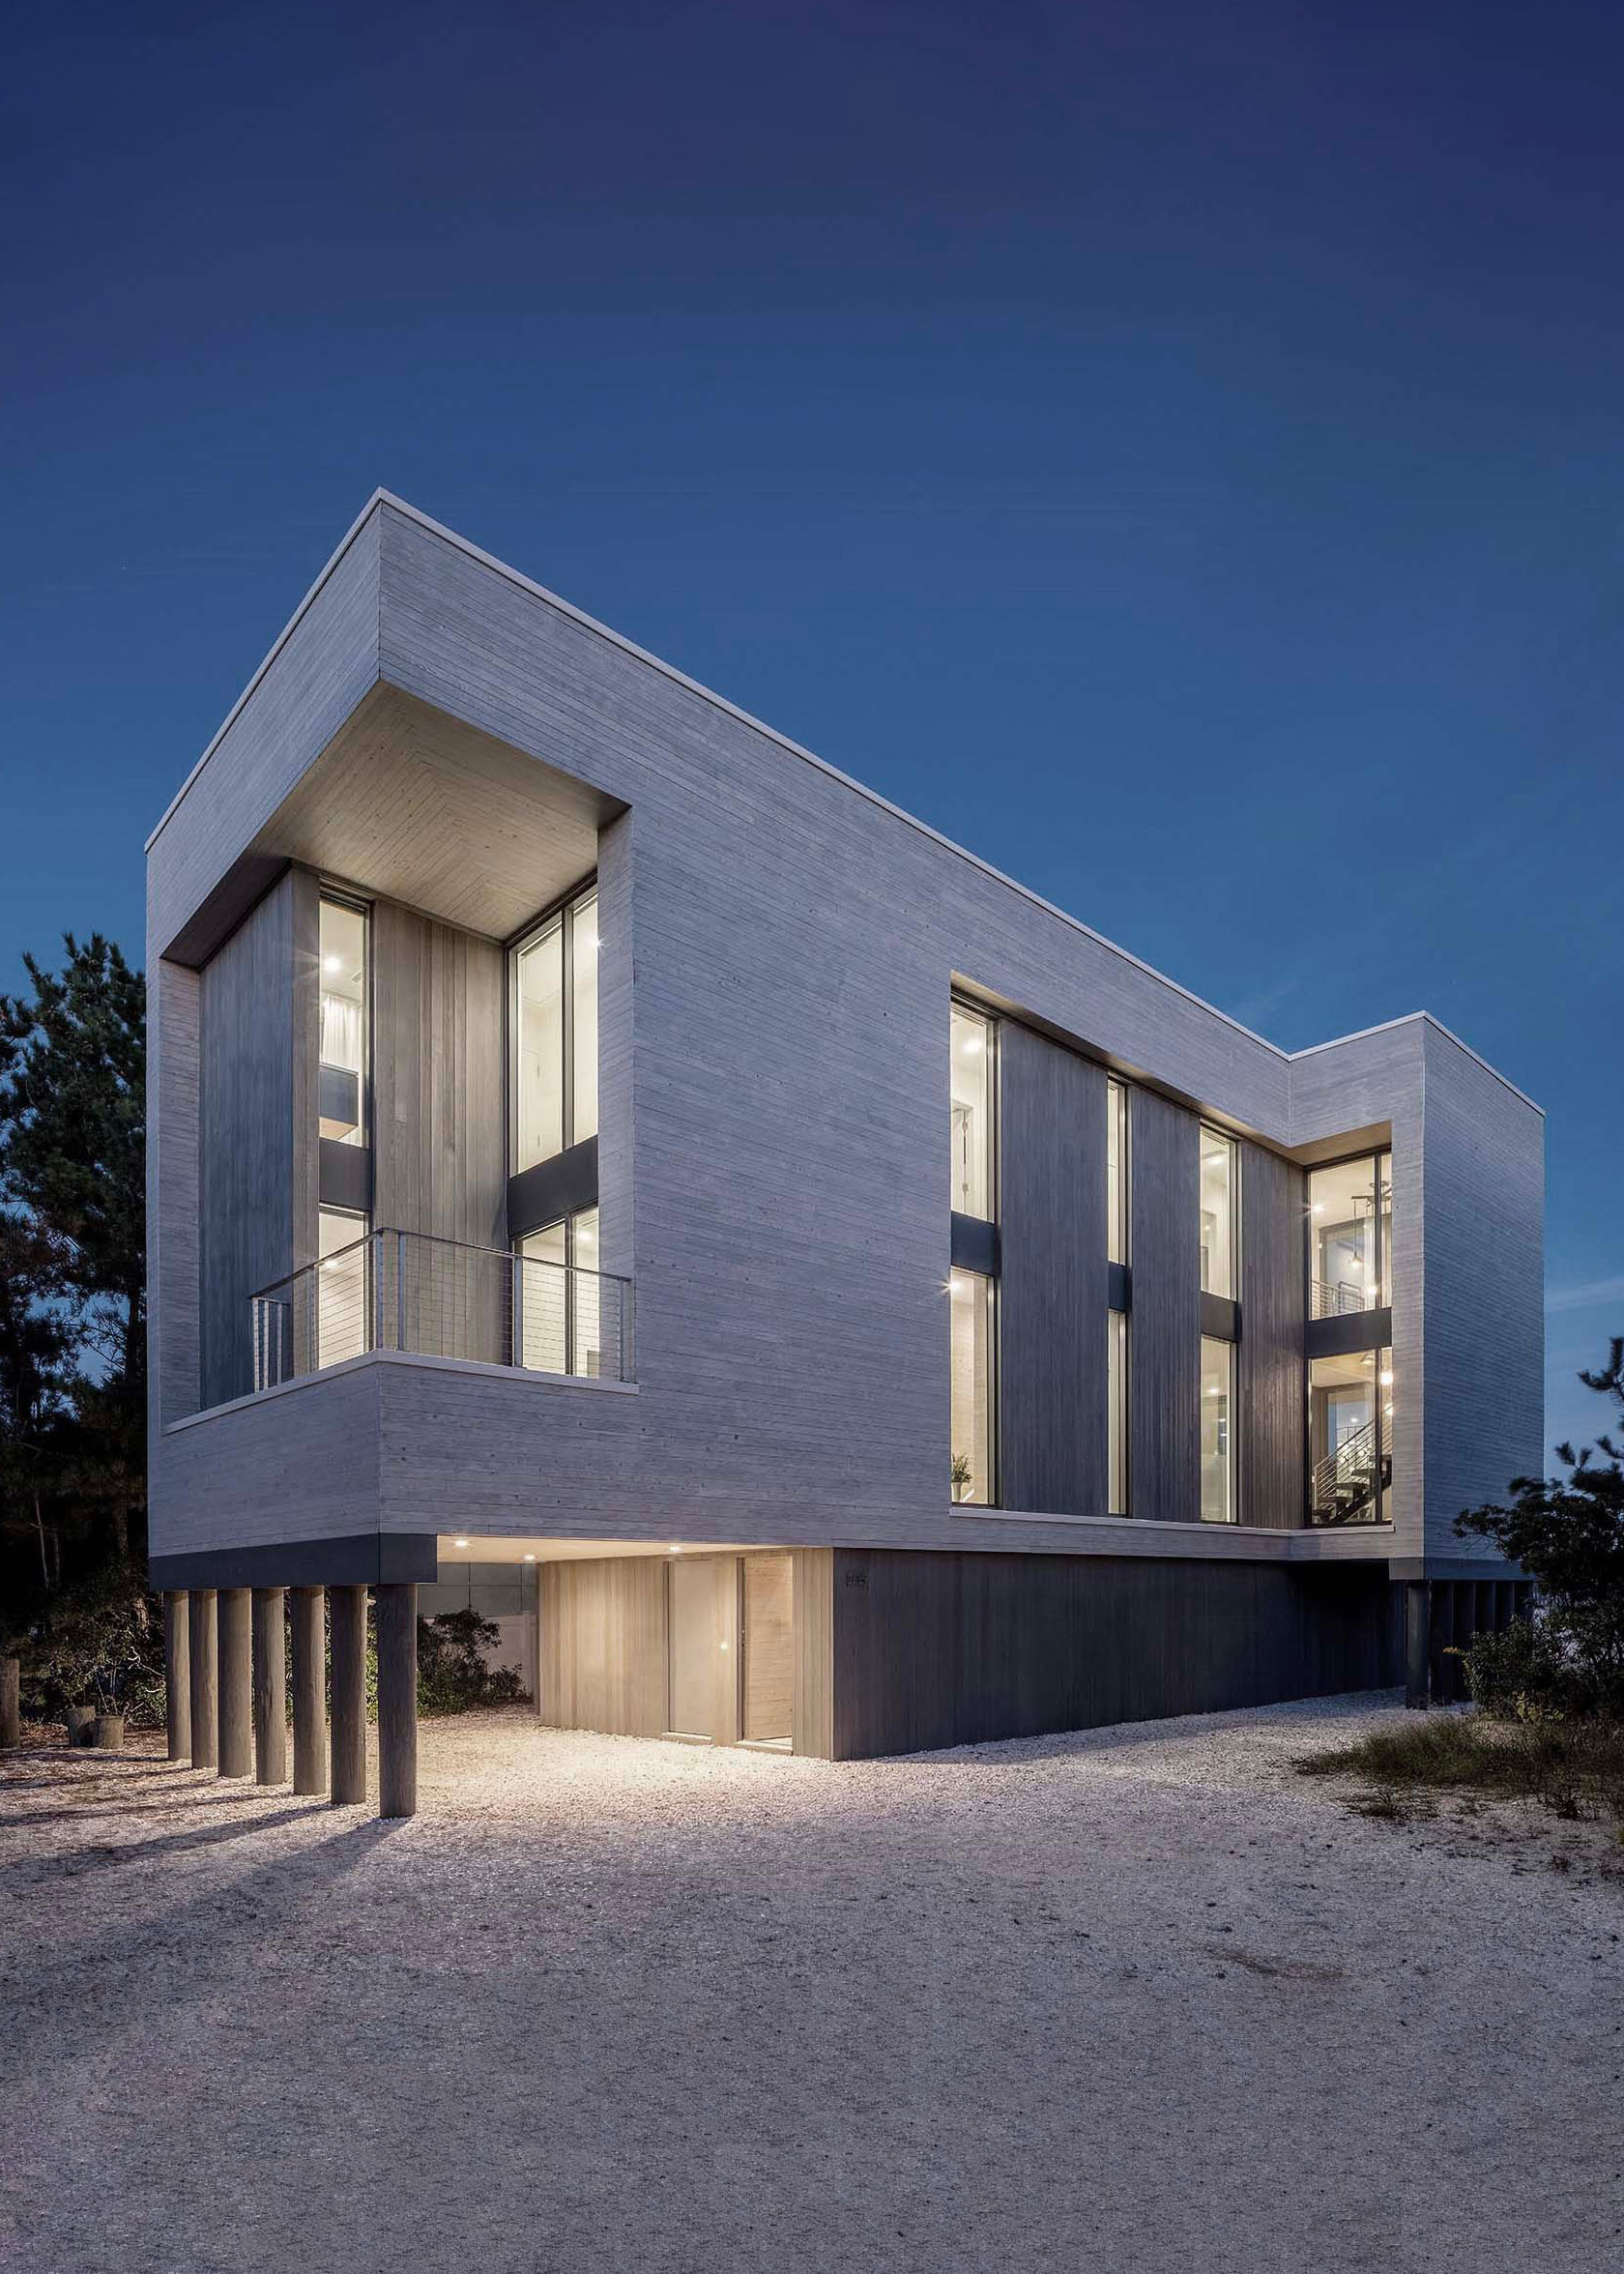 Exterior photo of the Beach Haven Residence by Specht Novak Architects. Shot by Taggart Sorenson featuring the facade of the home and sculptural lighting that highlight the structure in relation to its context.